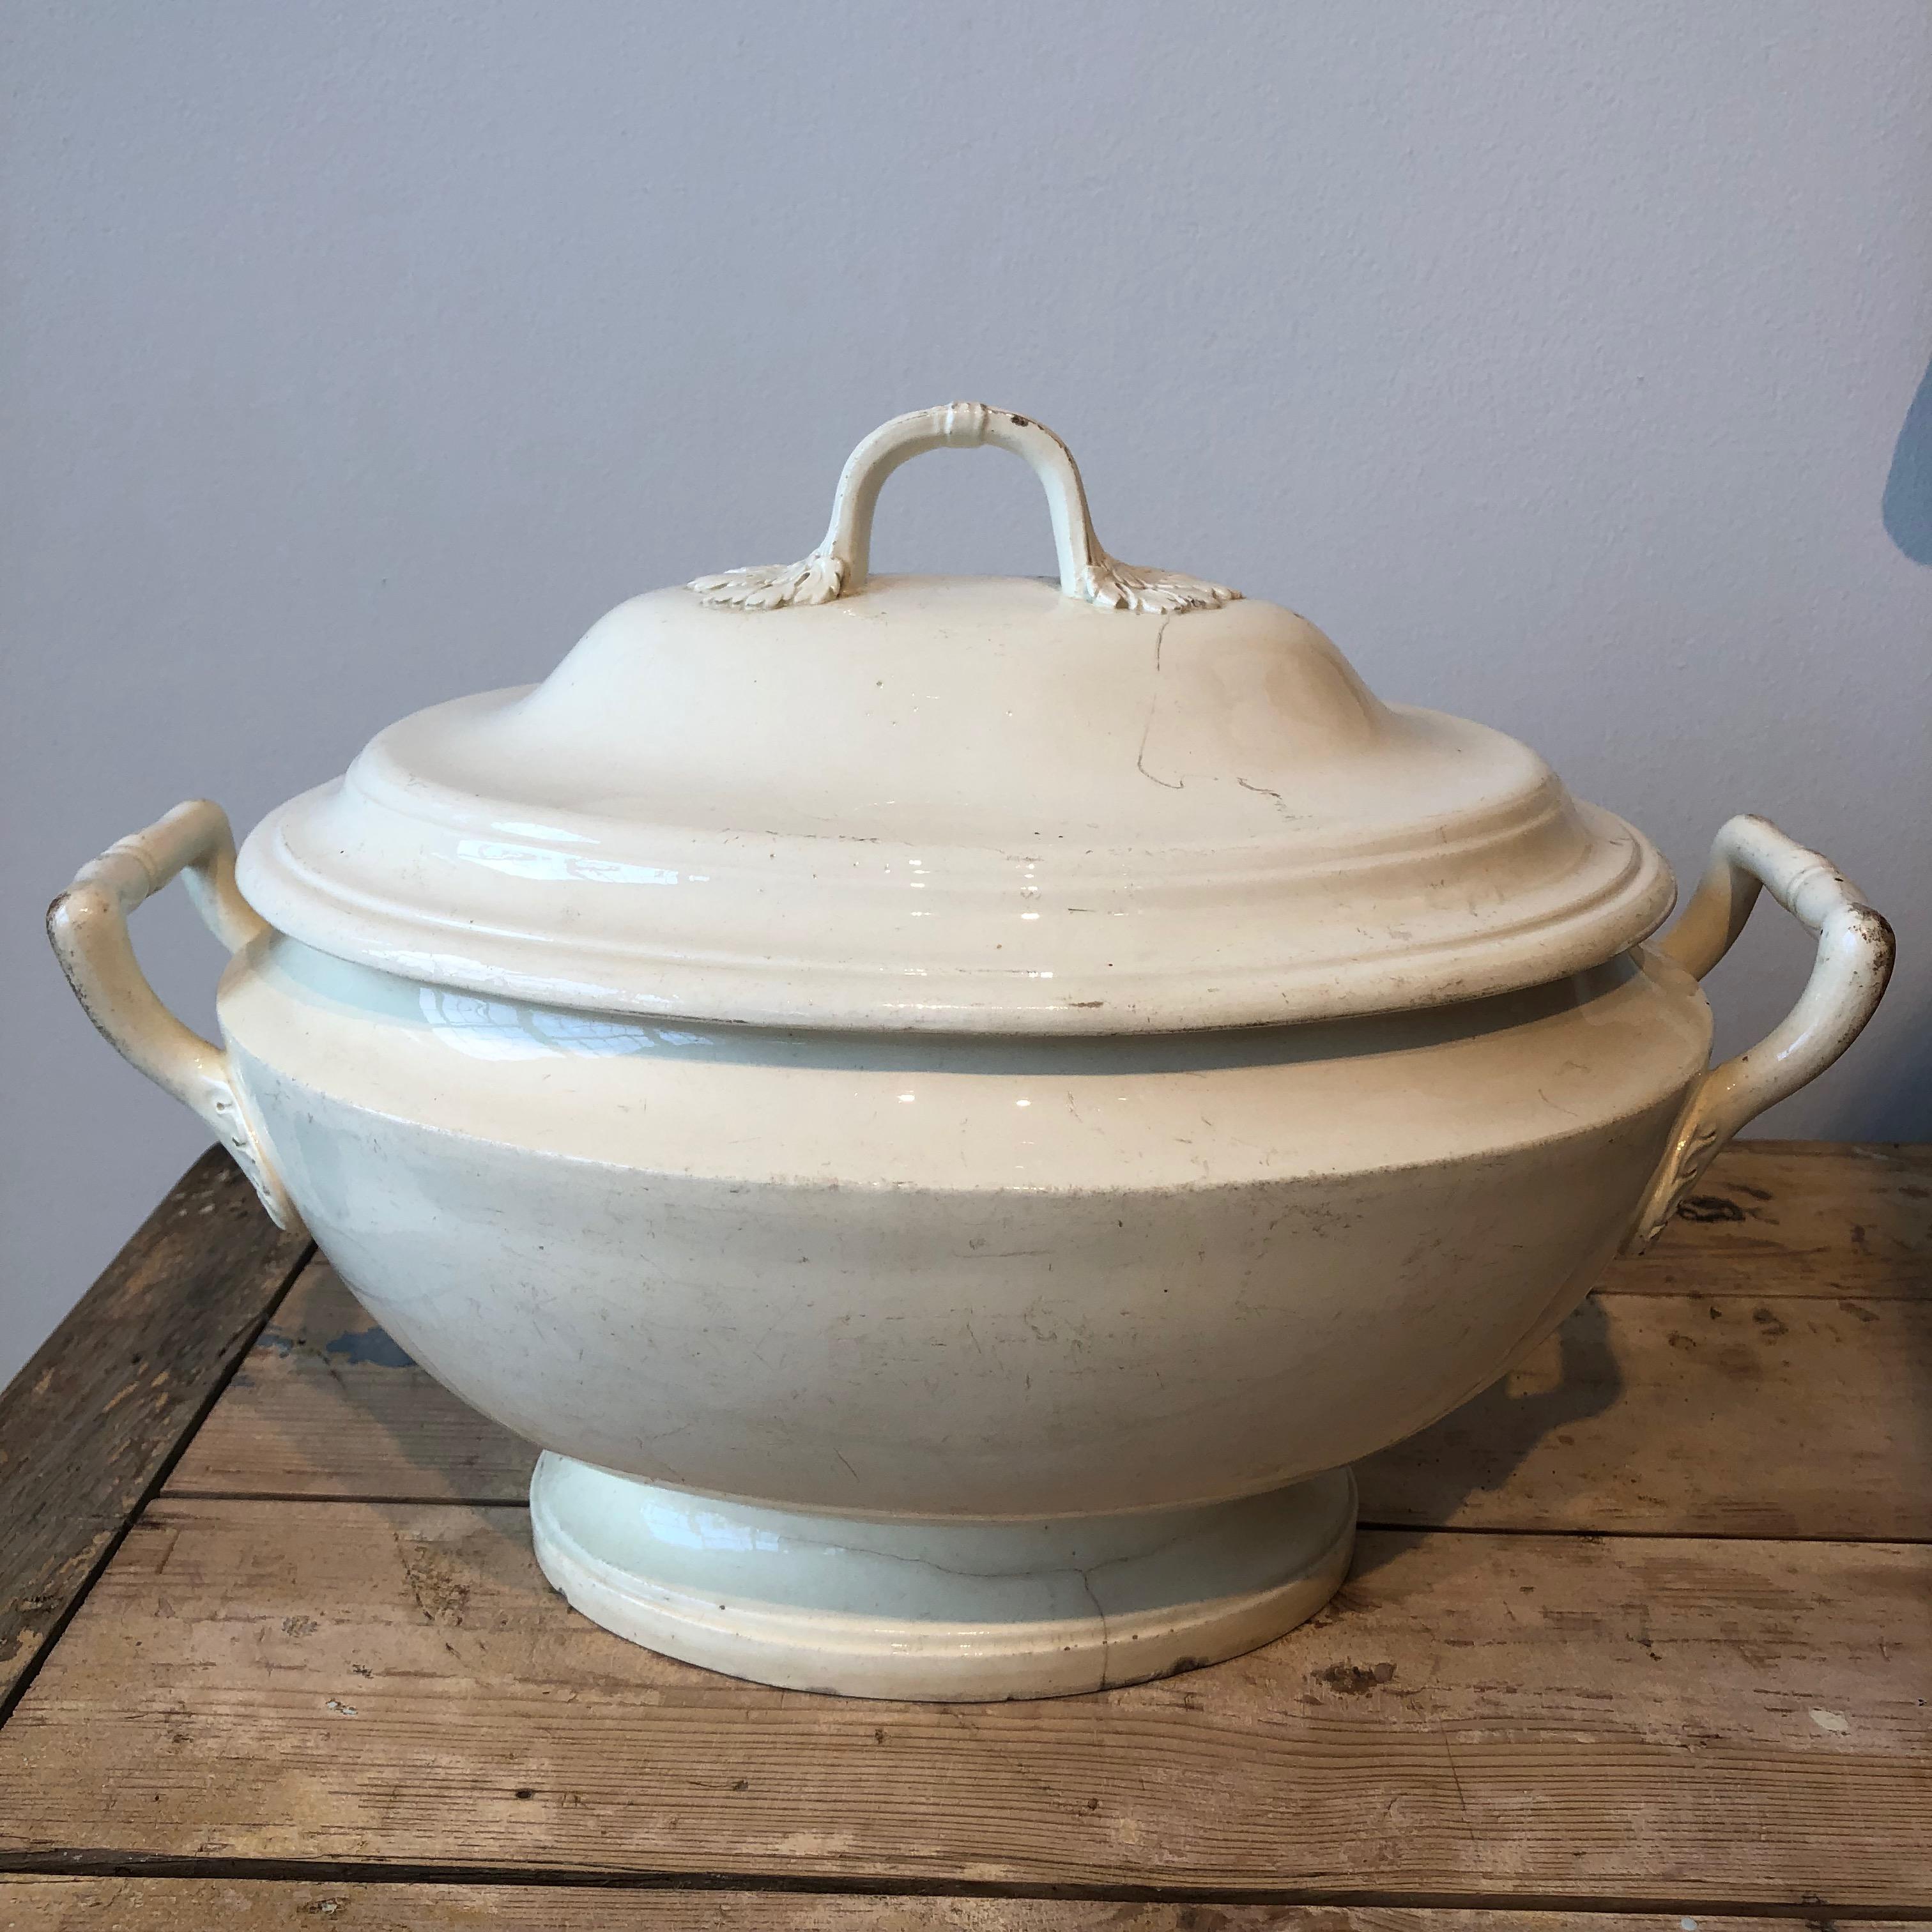 19th century French creamware soup tureen with lid, circa 1810-1820.